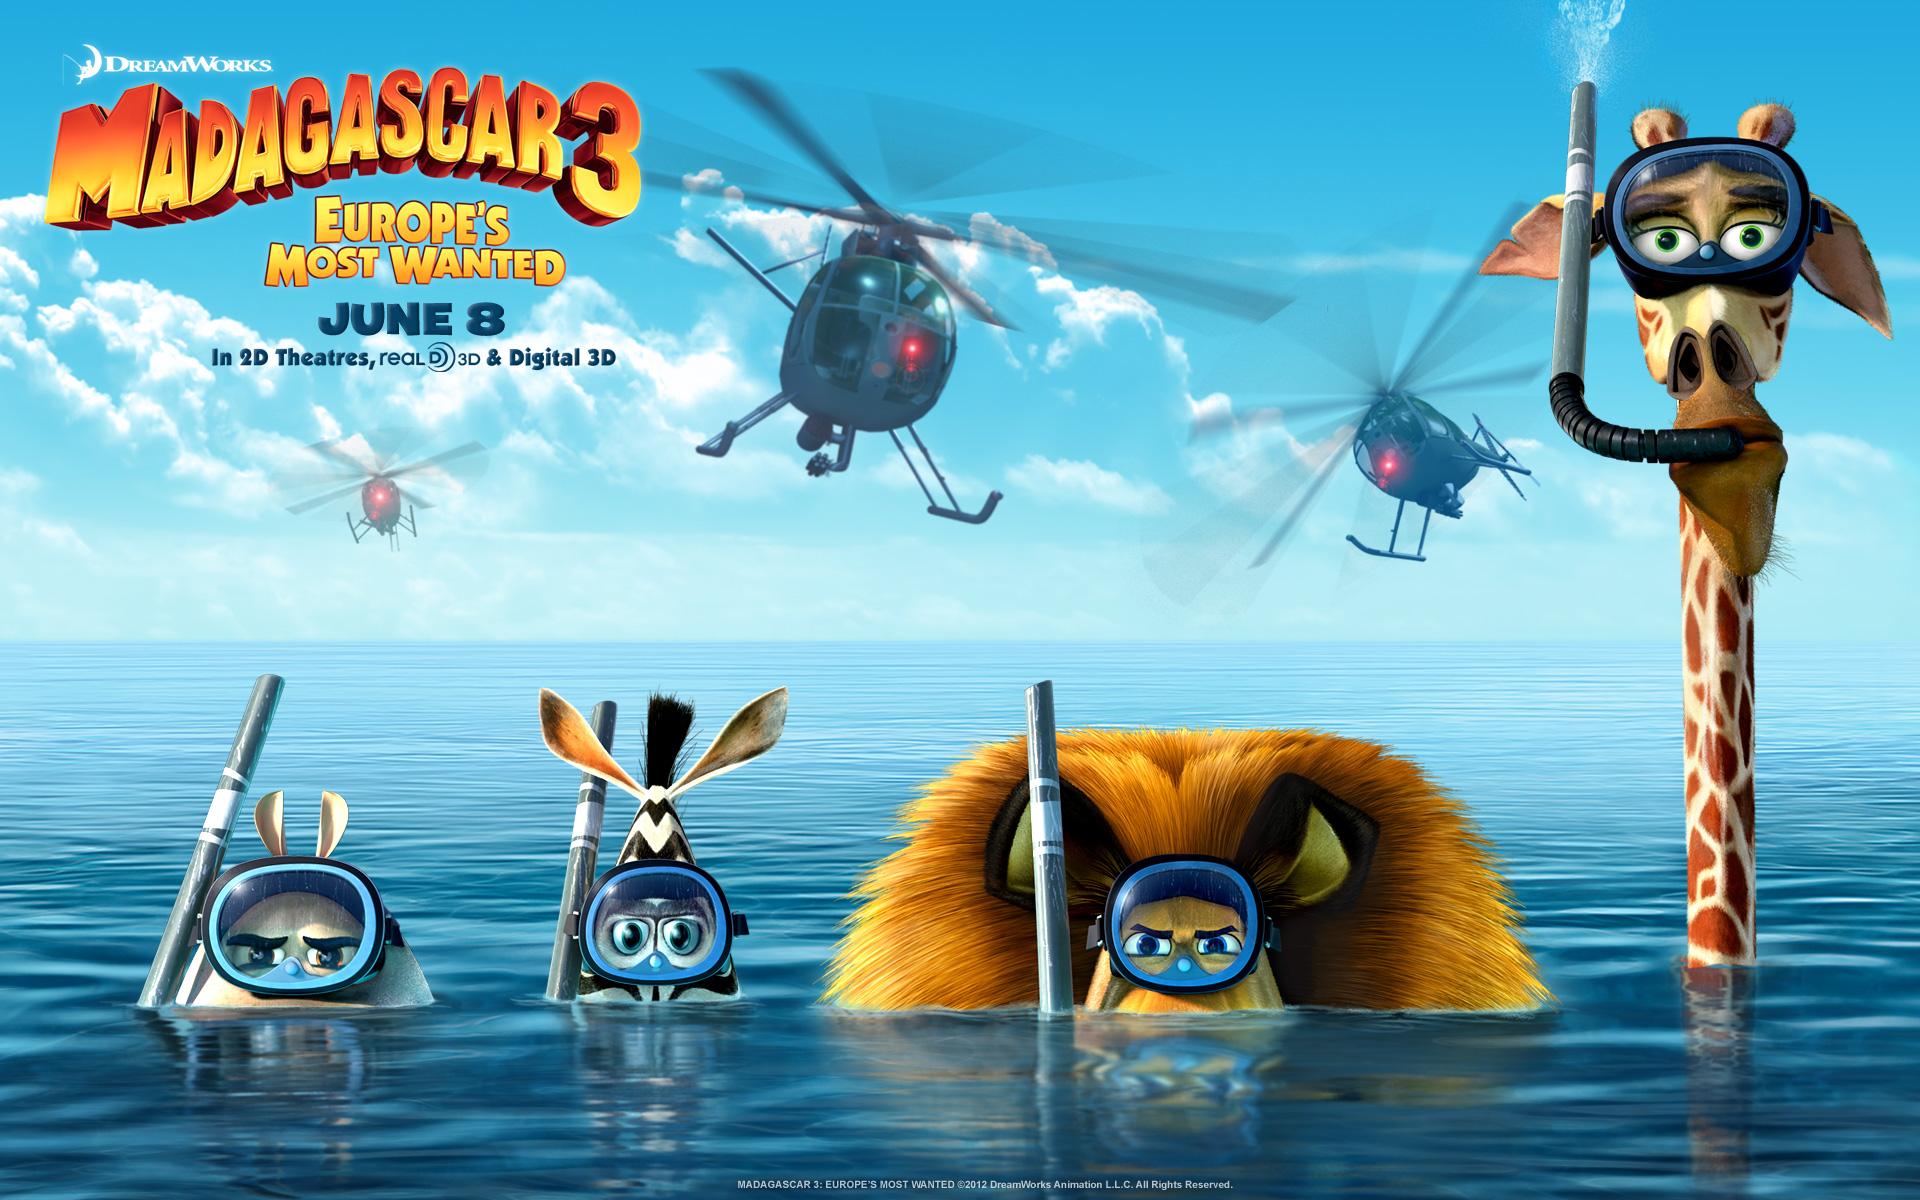 Madagascar 3 2012 Movie Wallpaper for Android